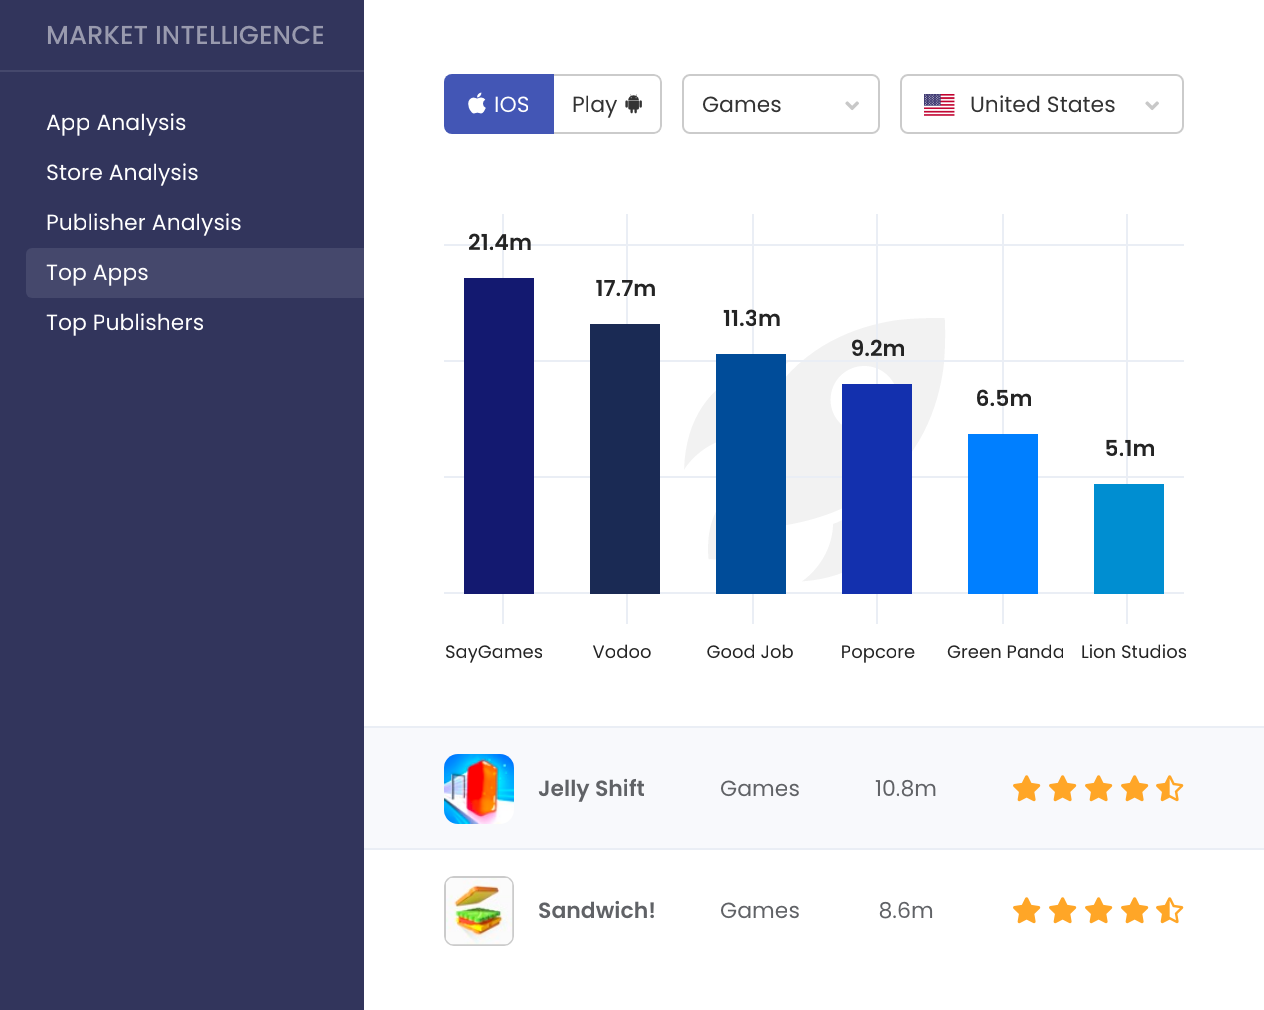 MobileAction's Market Intelligence Top Apps Tool